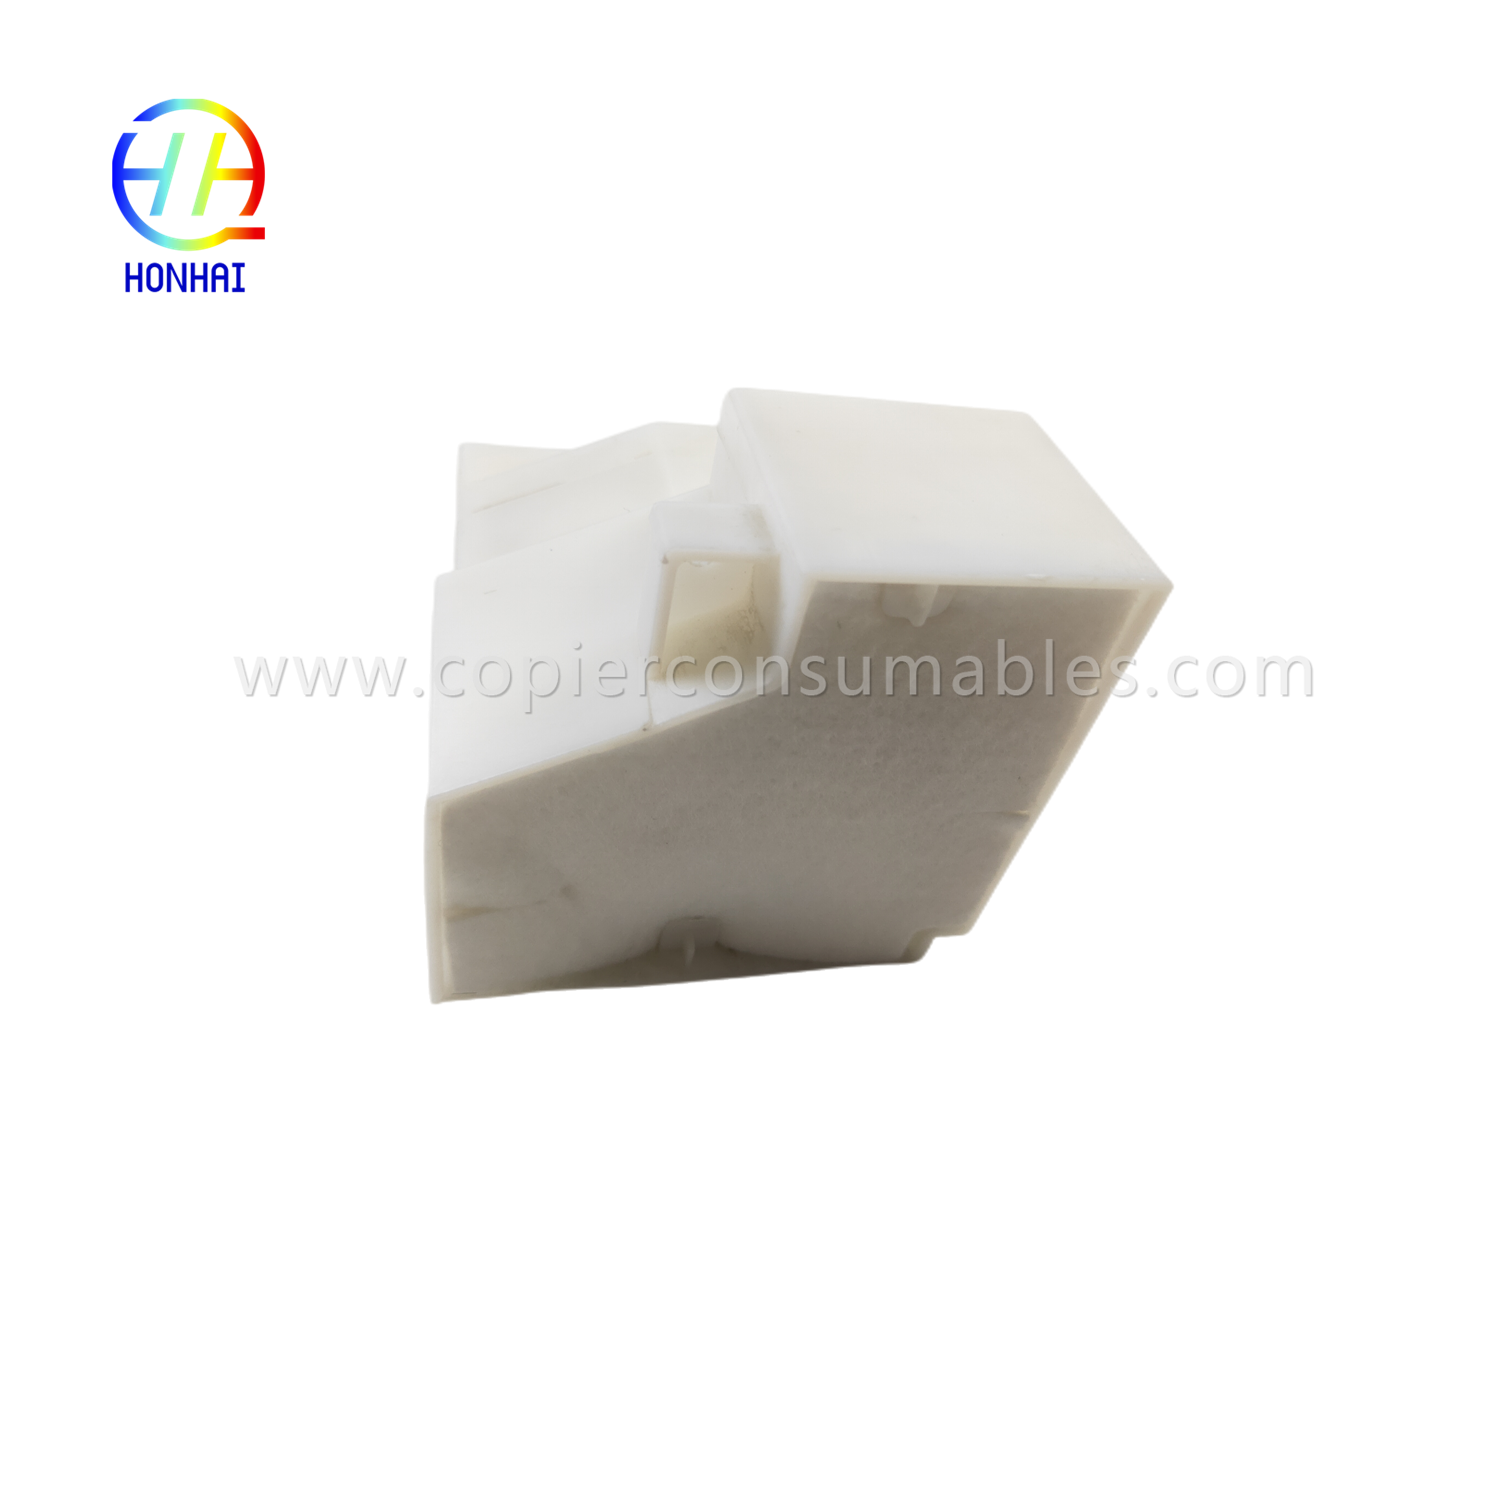 https://c585.goodao.net/waste-inktpad-for-epson-l800-l805-l810-l850-r280-r290-product/